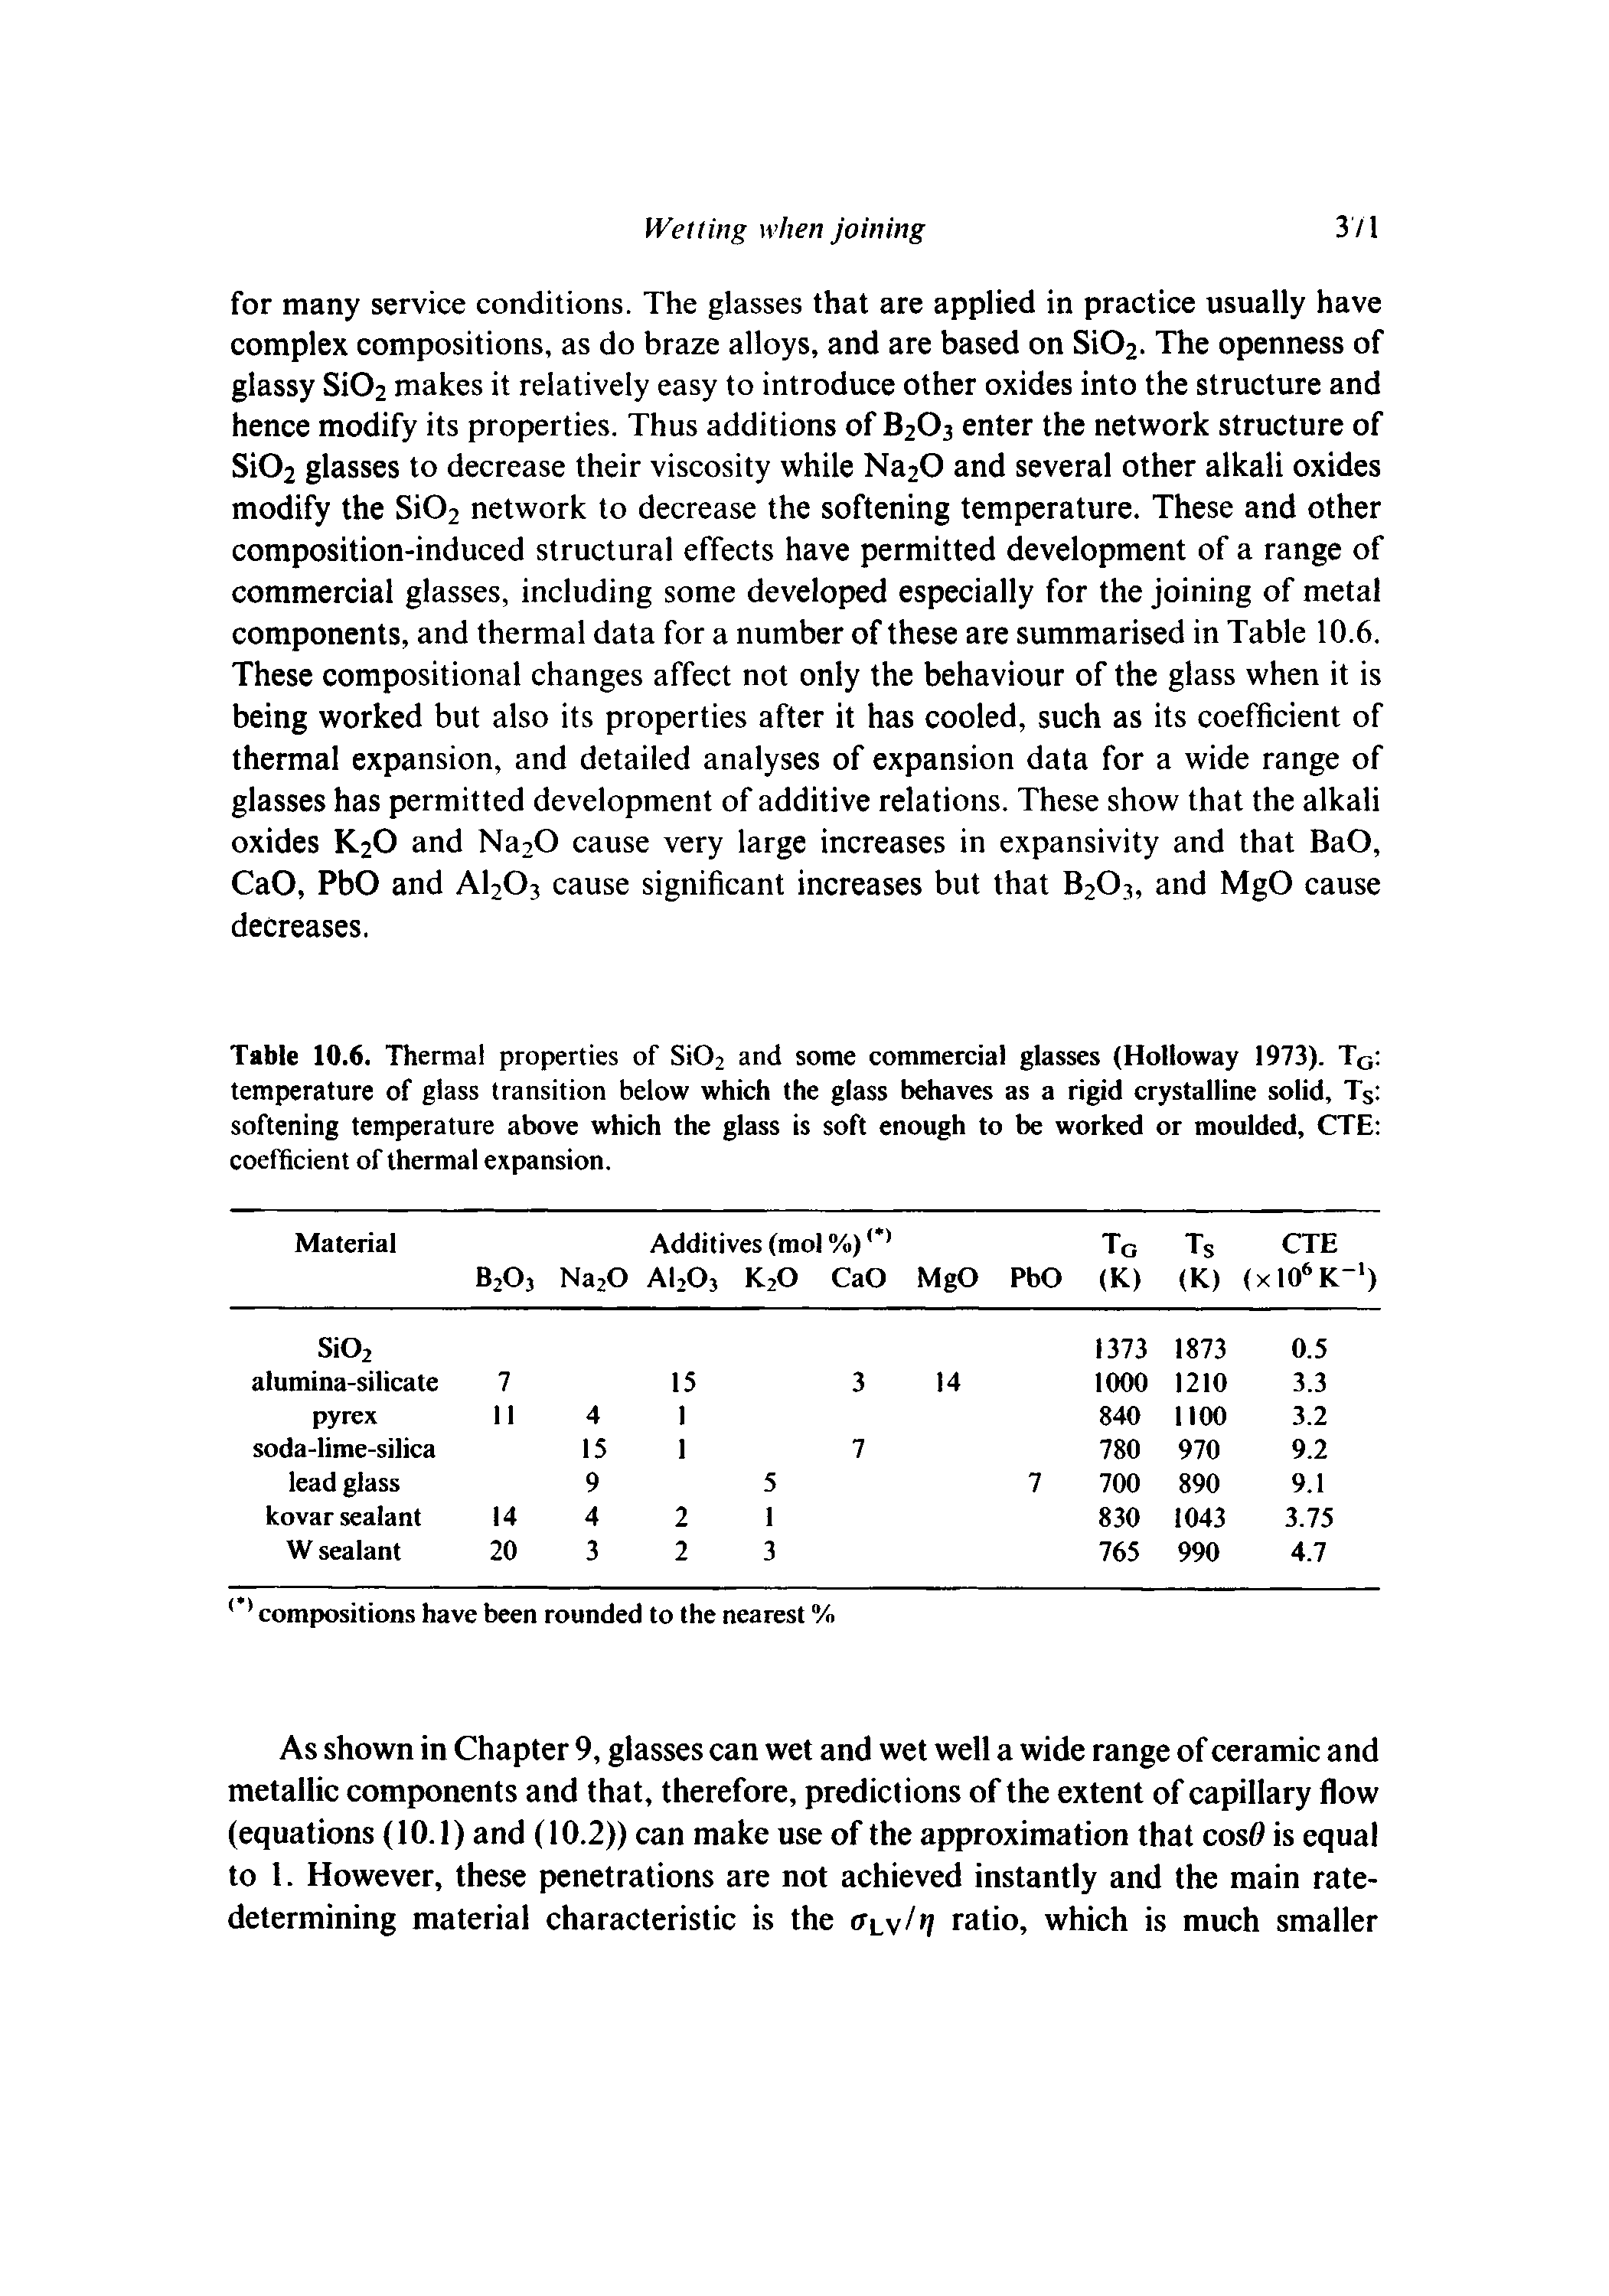 Table 10.6. Thermal properties of Si02 and some commercial glasses (Holloway 1973). TG temperature of glass transition below which the glass behaves as a rigid crystalline solid, Ts softening temperature above which the glass is soft enough to be worked or moulded, CTE coefficient of thermal expansion.